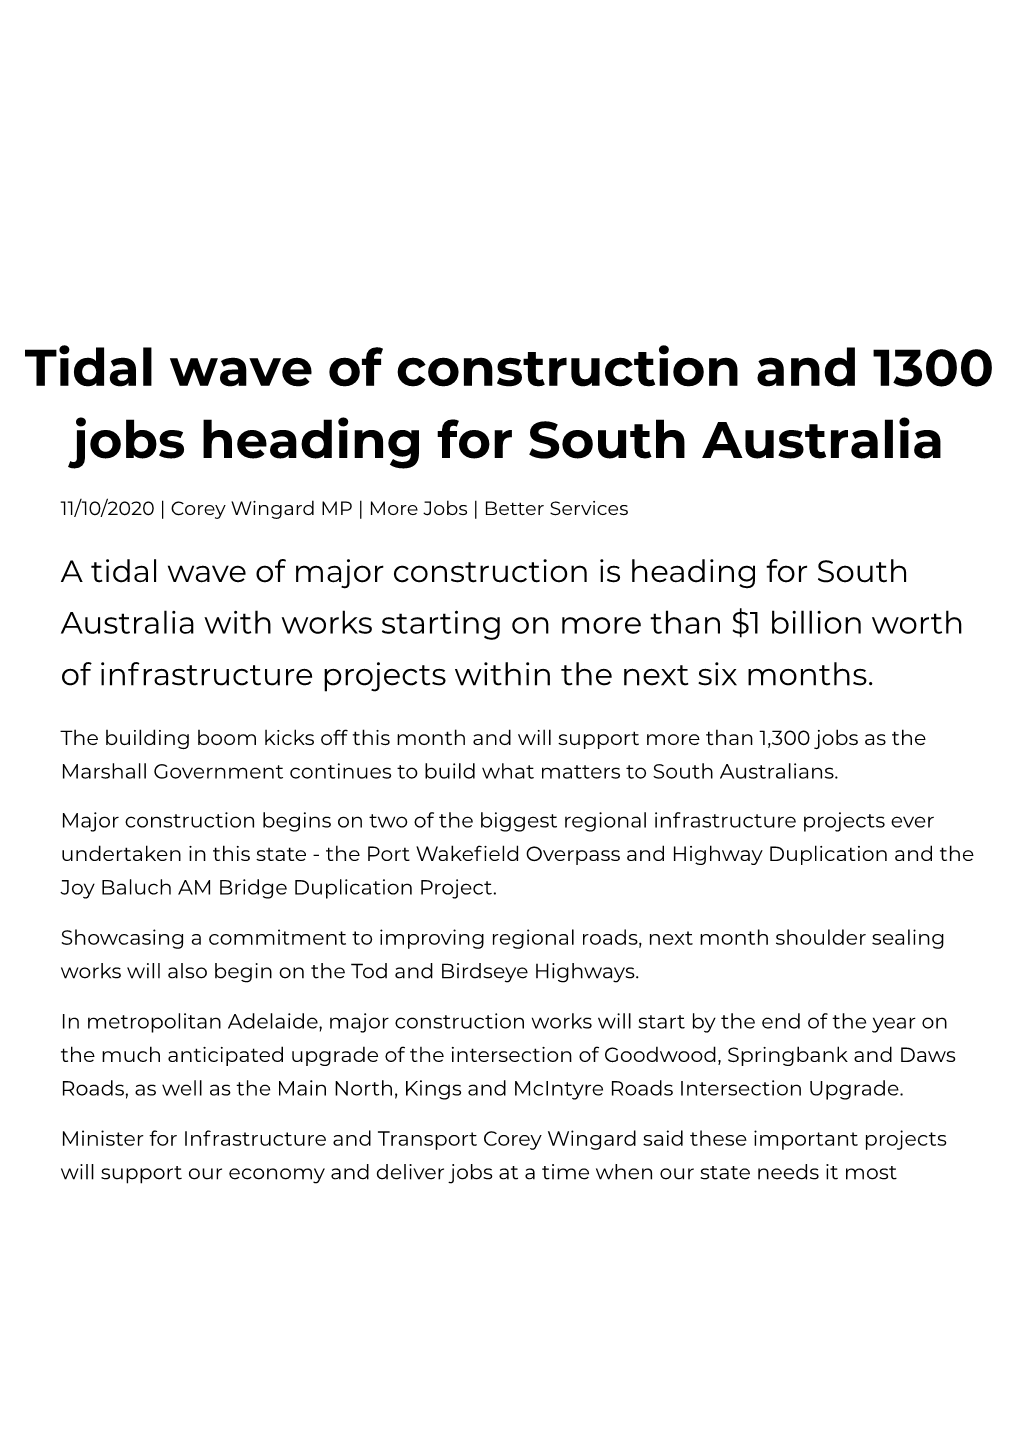 Tidal Wave of Construction and 1300 Jobs Heading for South Australia